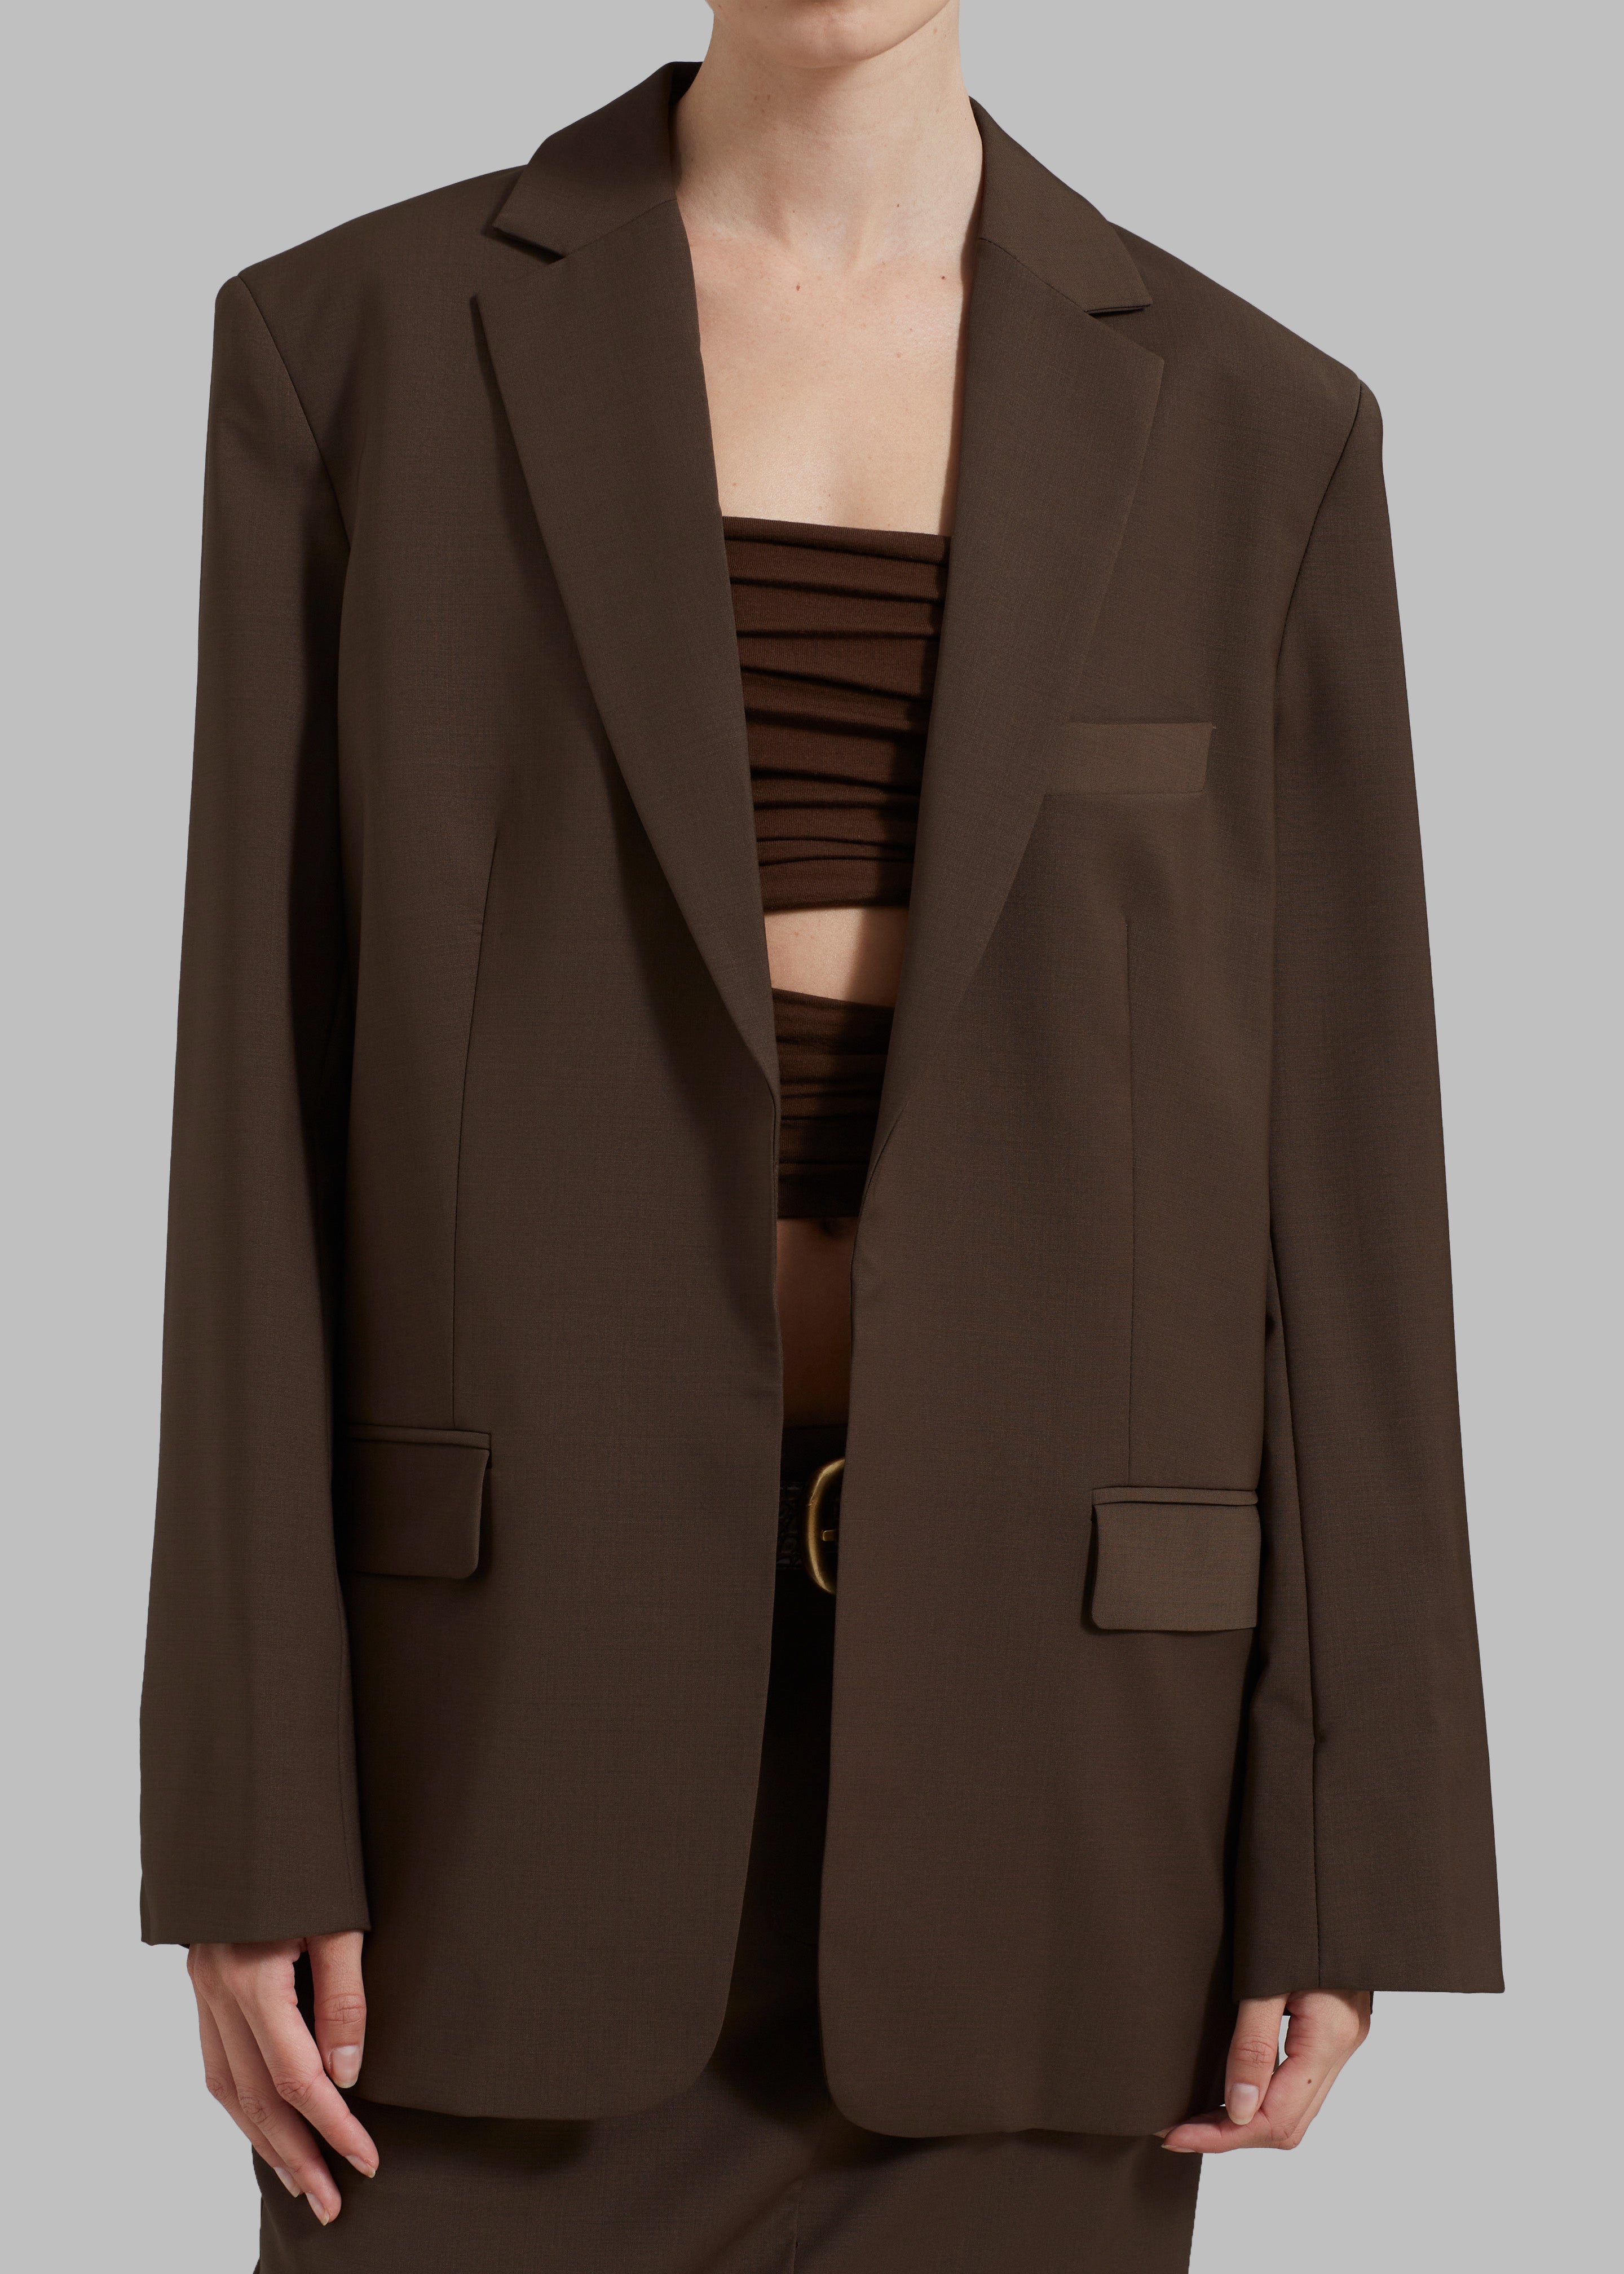 Matteau Relaxed Tailored Blazer - Coffee - 4